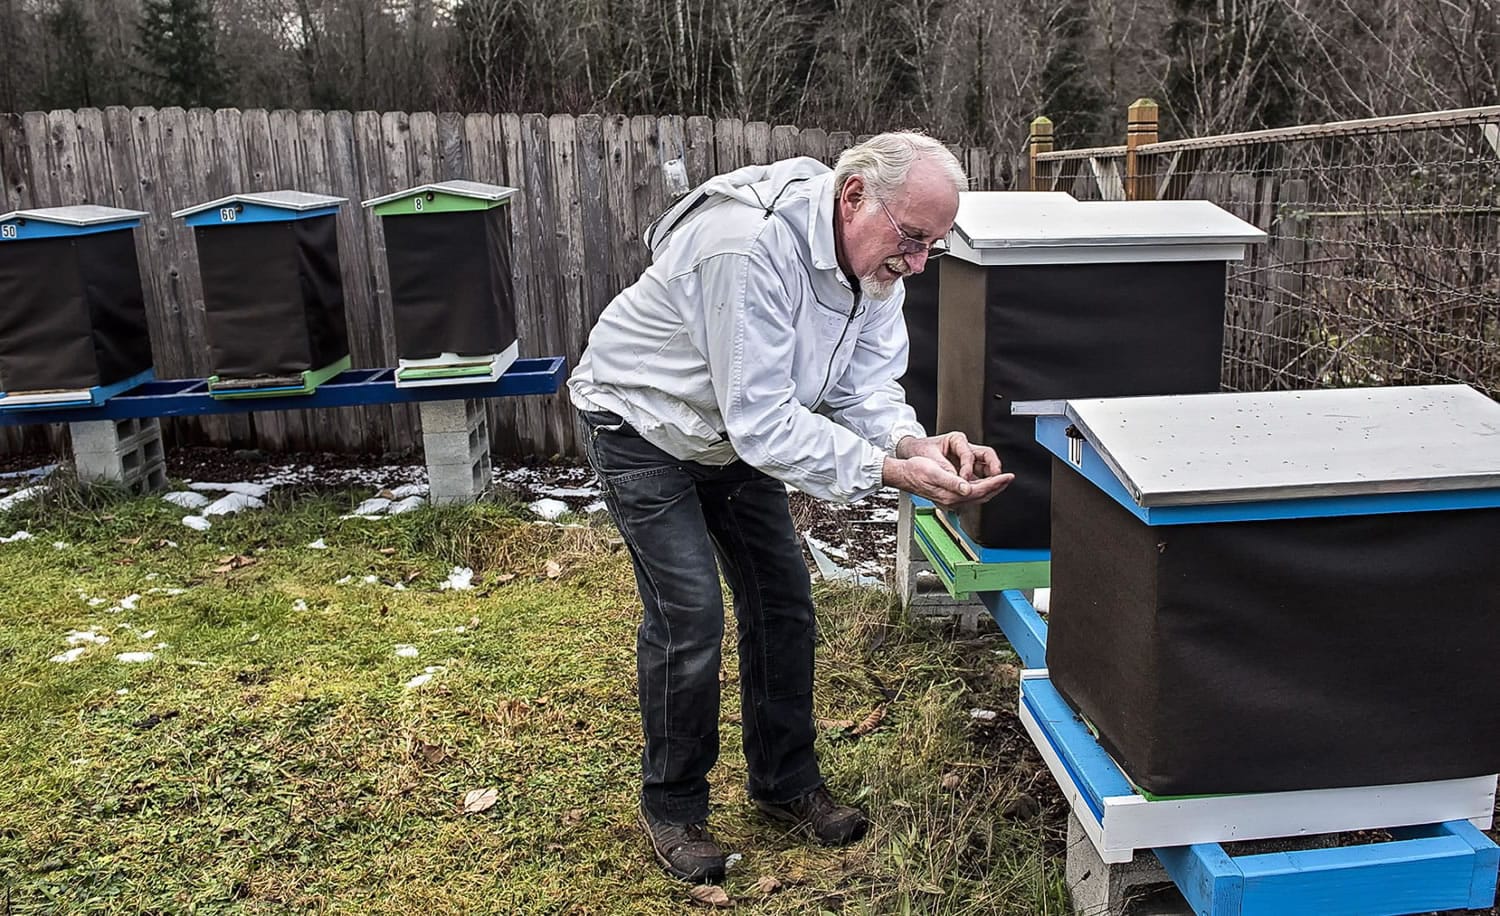 Doug Penning gently picks up a very cold bee he found outside its hive Jan. 7 in Longview. He cupped his hands and blew warm air on it to revive it. After a night in his warm lab, he released it to fly back to its hive.